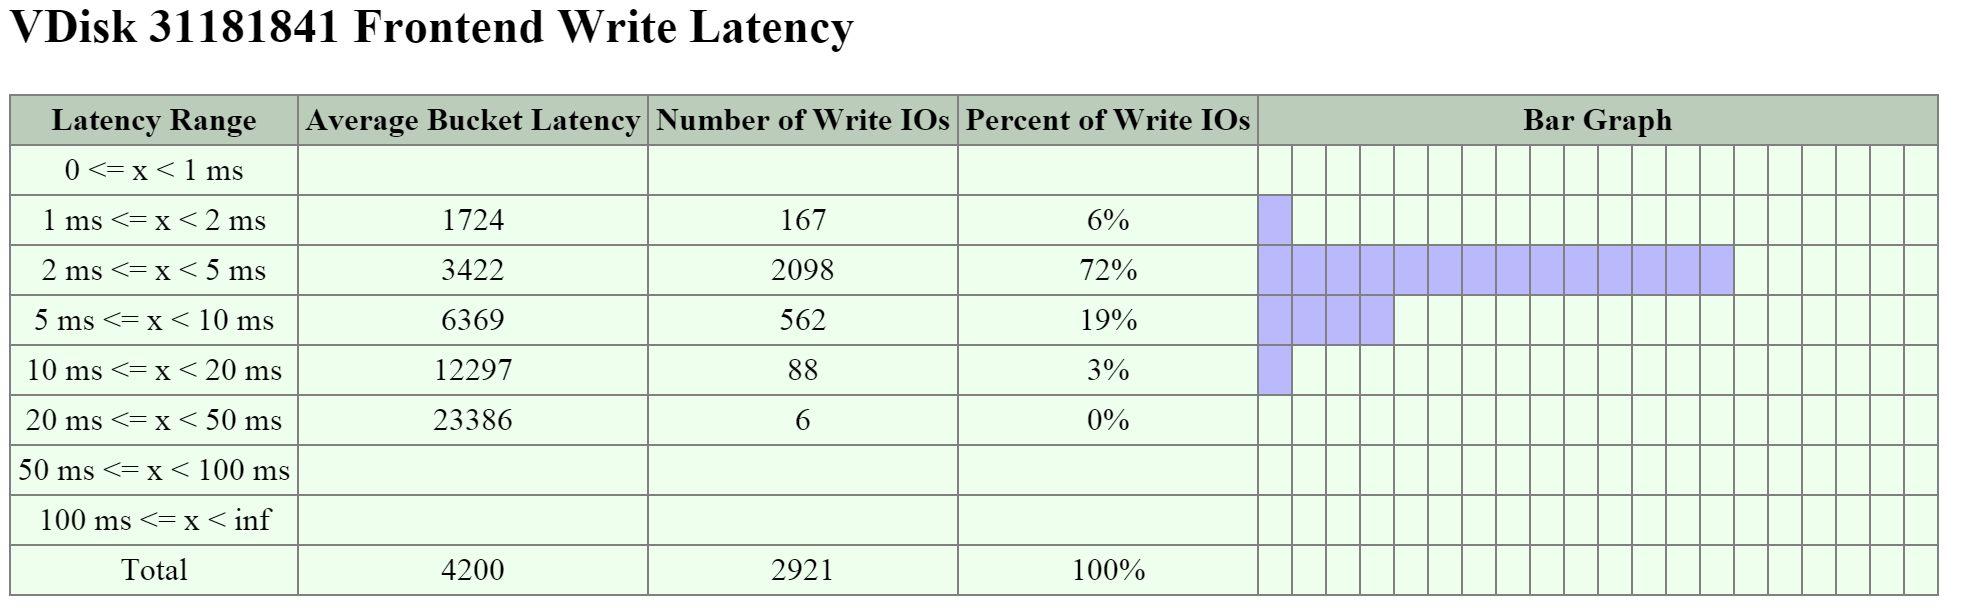 2009 Page - vDisk Stats - Frontend Write Latency